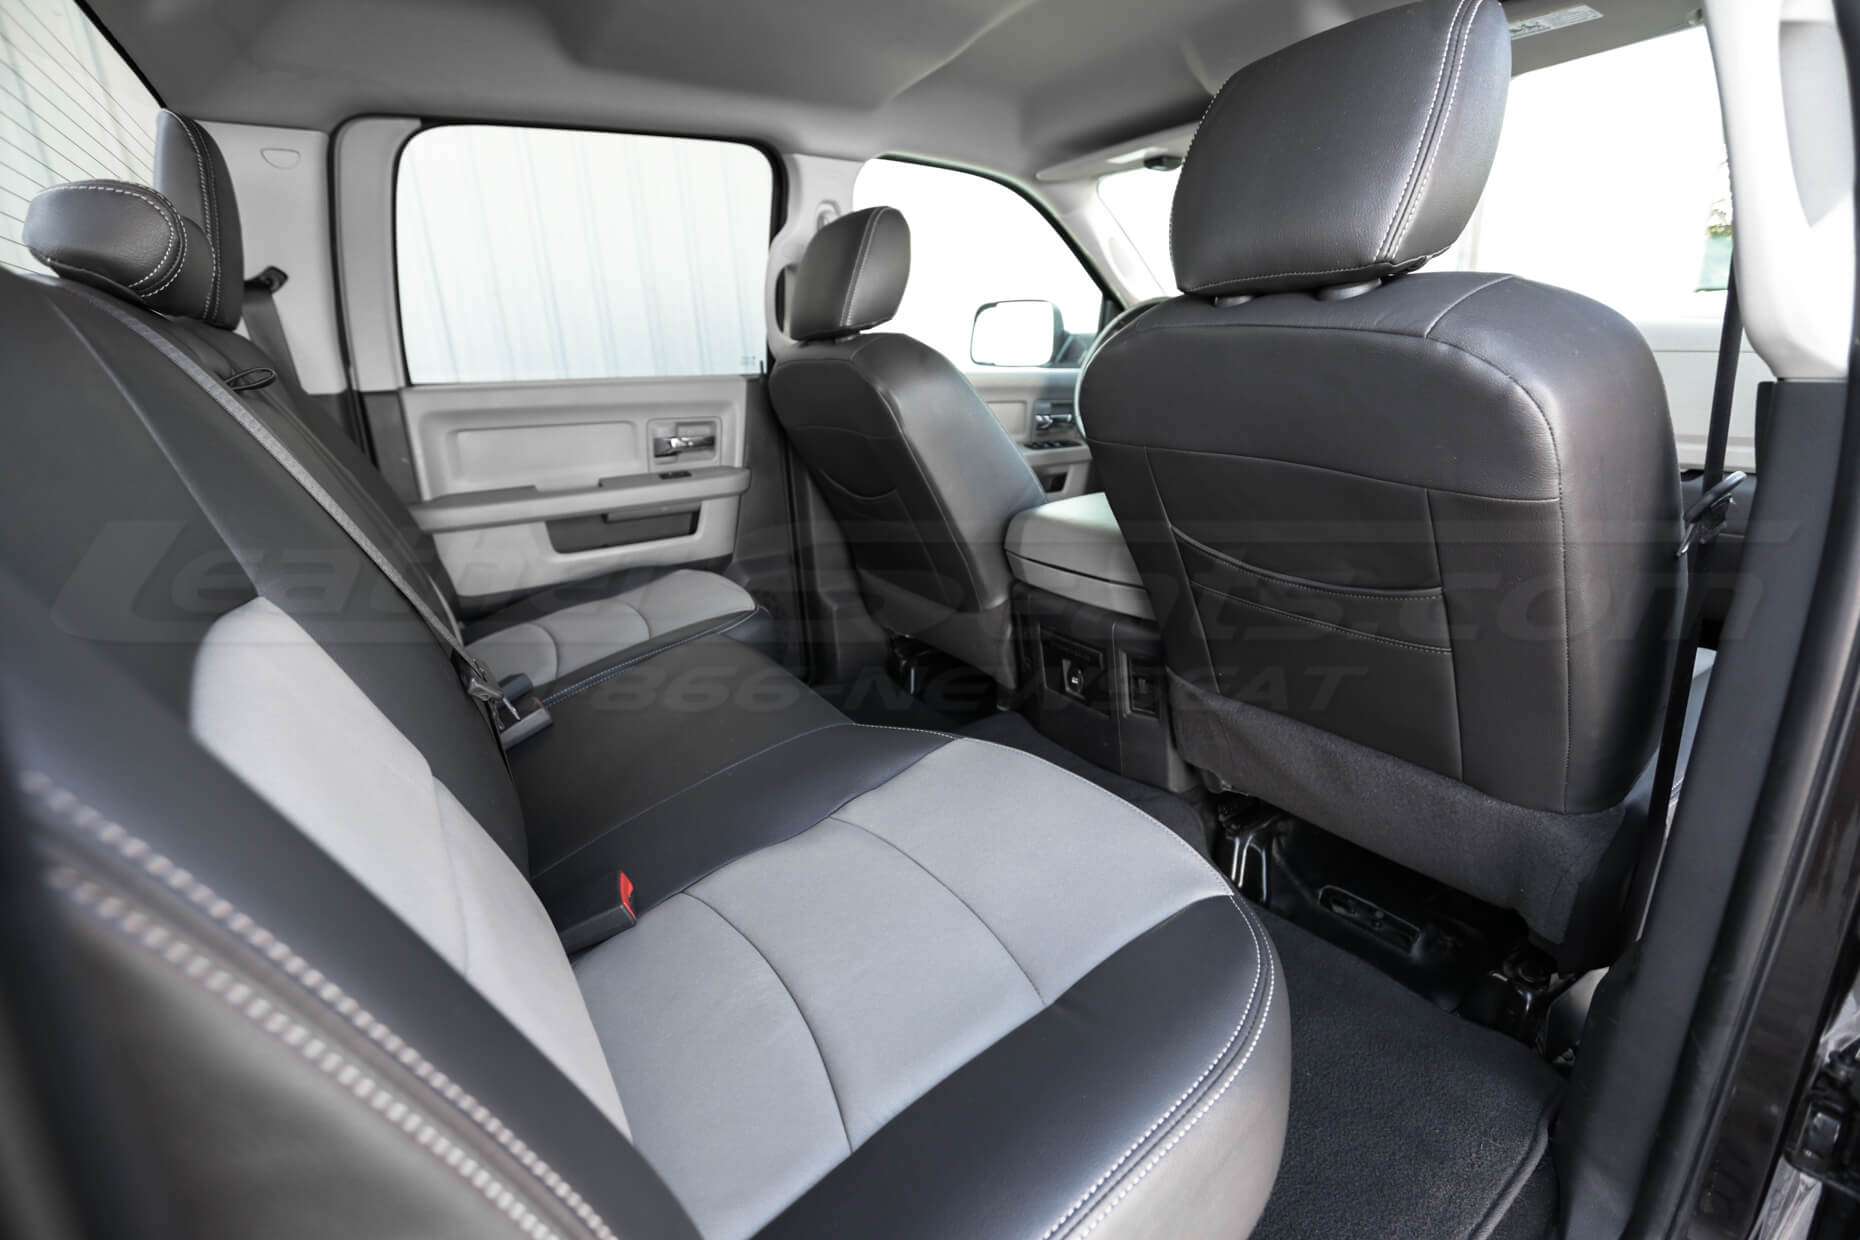 Dodge Ram Leather Seats - Black & Dark Graphite - Back view of front seats